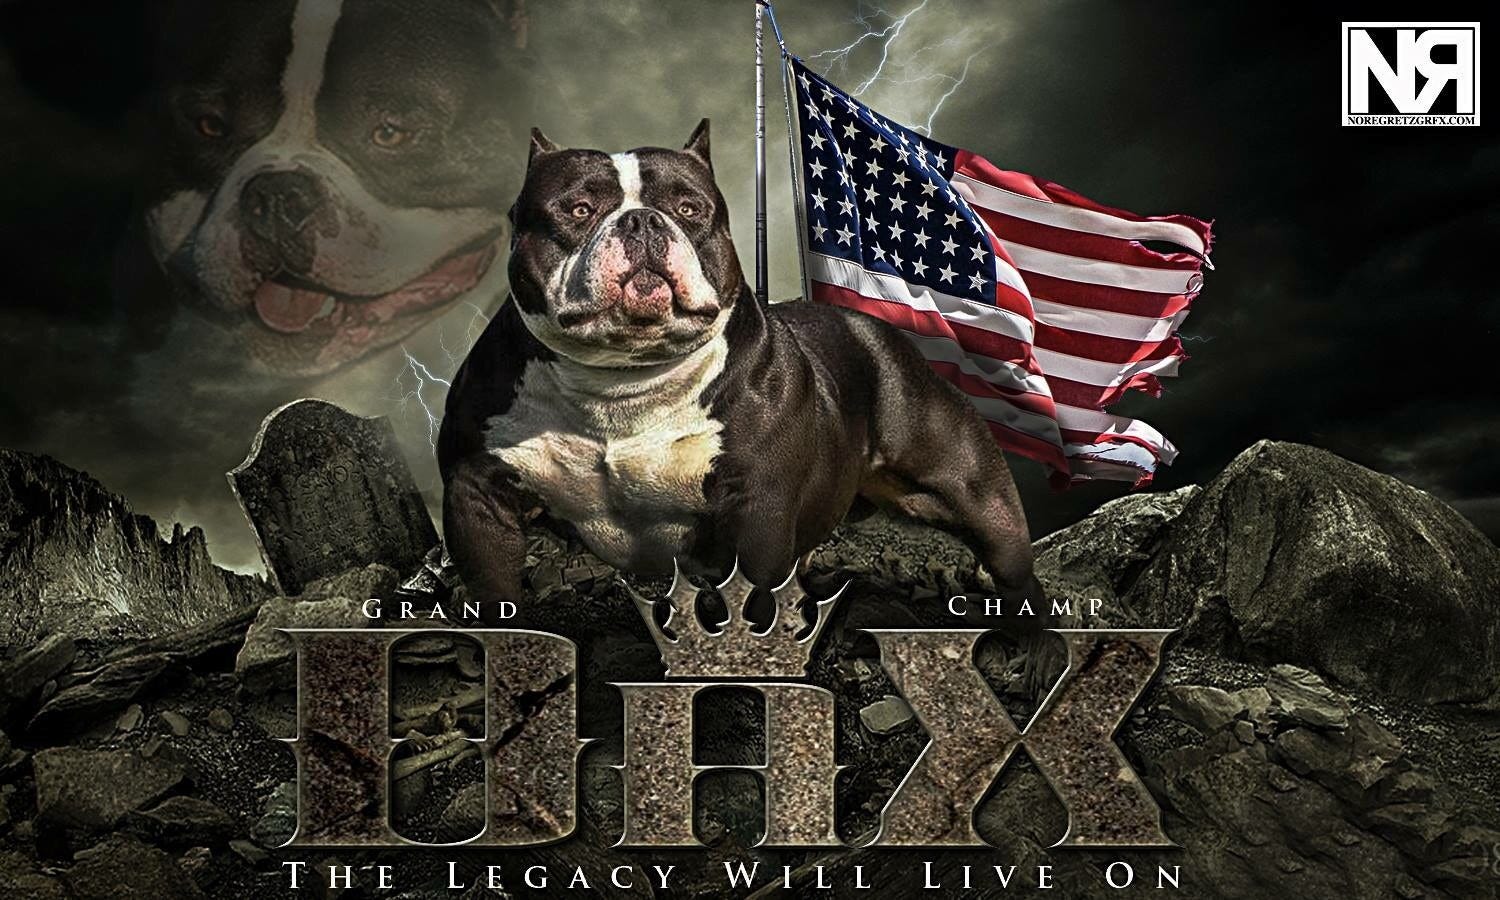 AMERICAN BULLY - LOUIS V IS DAX DONE RIGHT!!! 